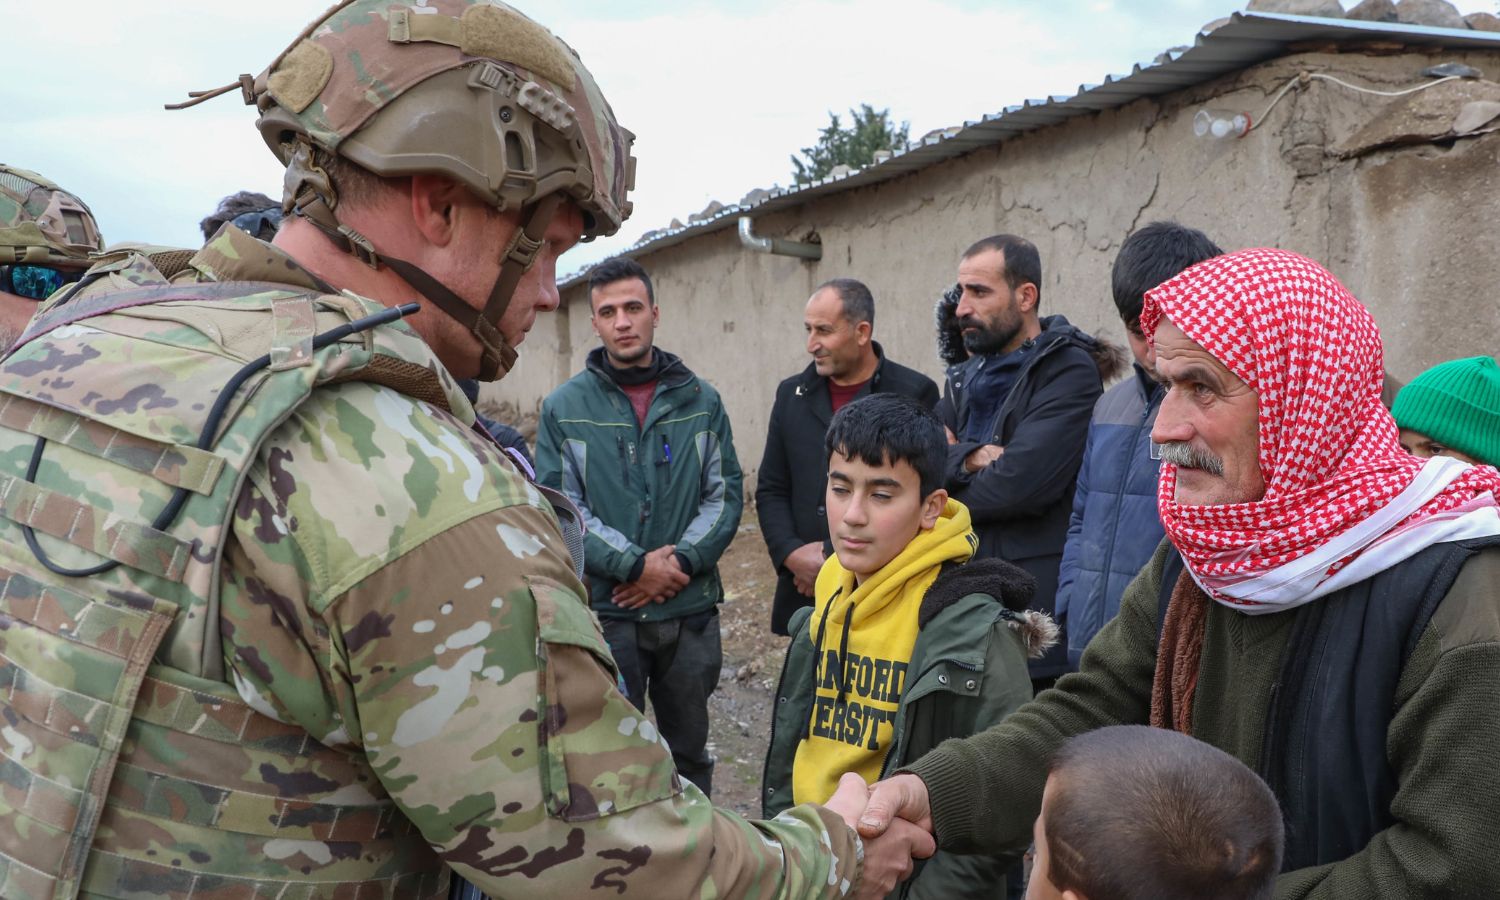 An American soldier alongside civilians from the eastern region of Syria - December 23, 2022 (CENTCOM)